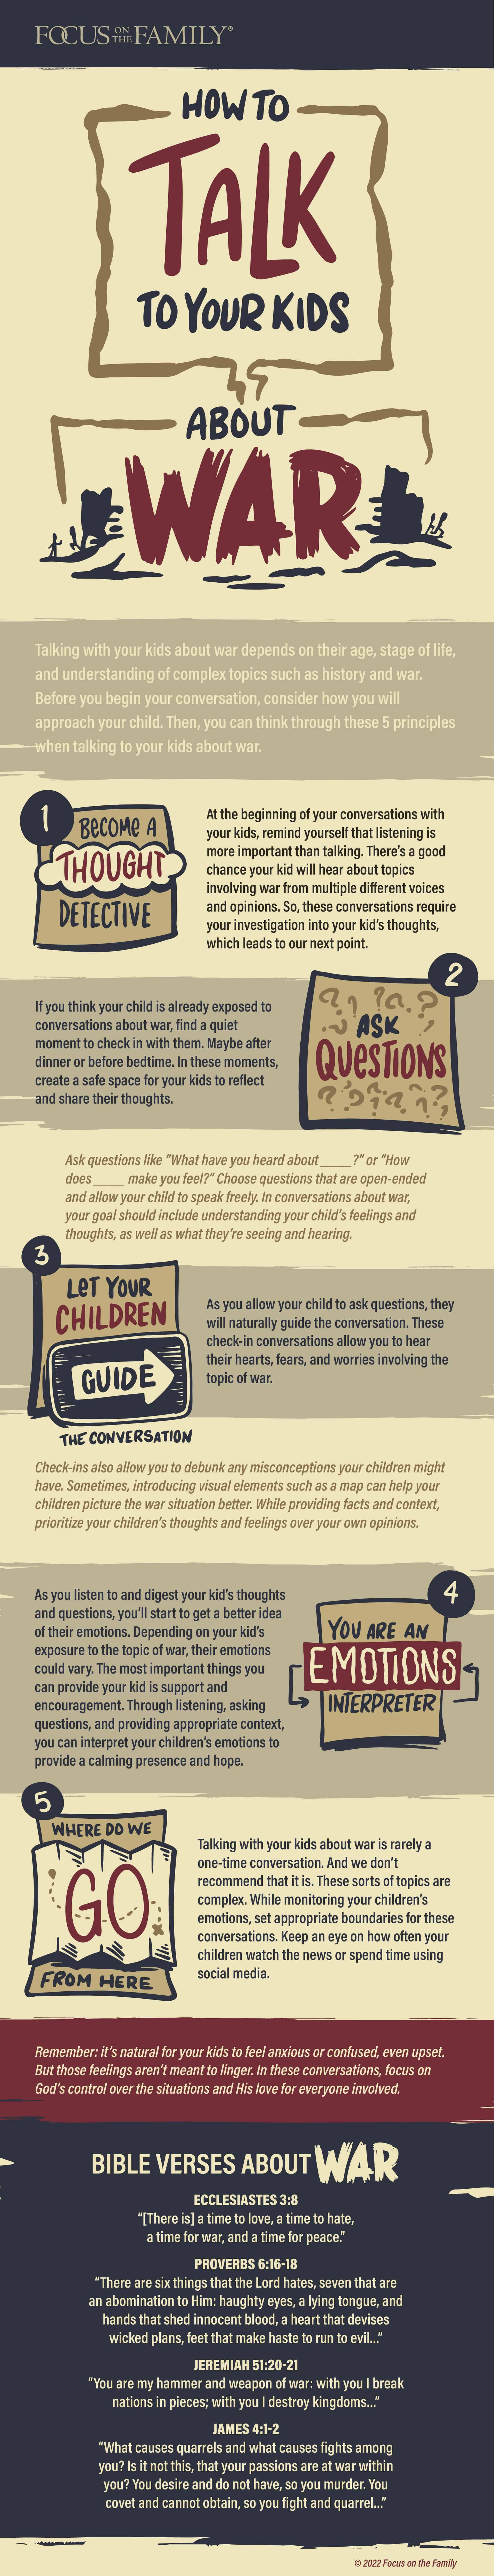 How to Talk with Your Kids about War